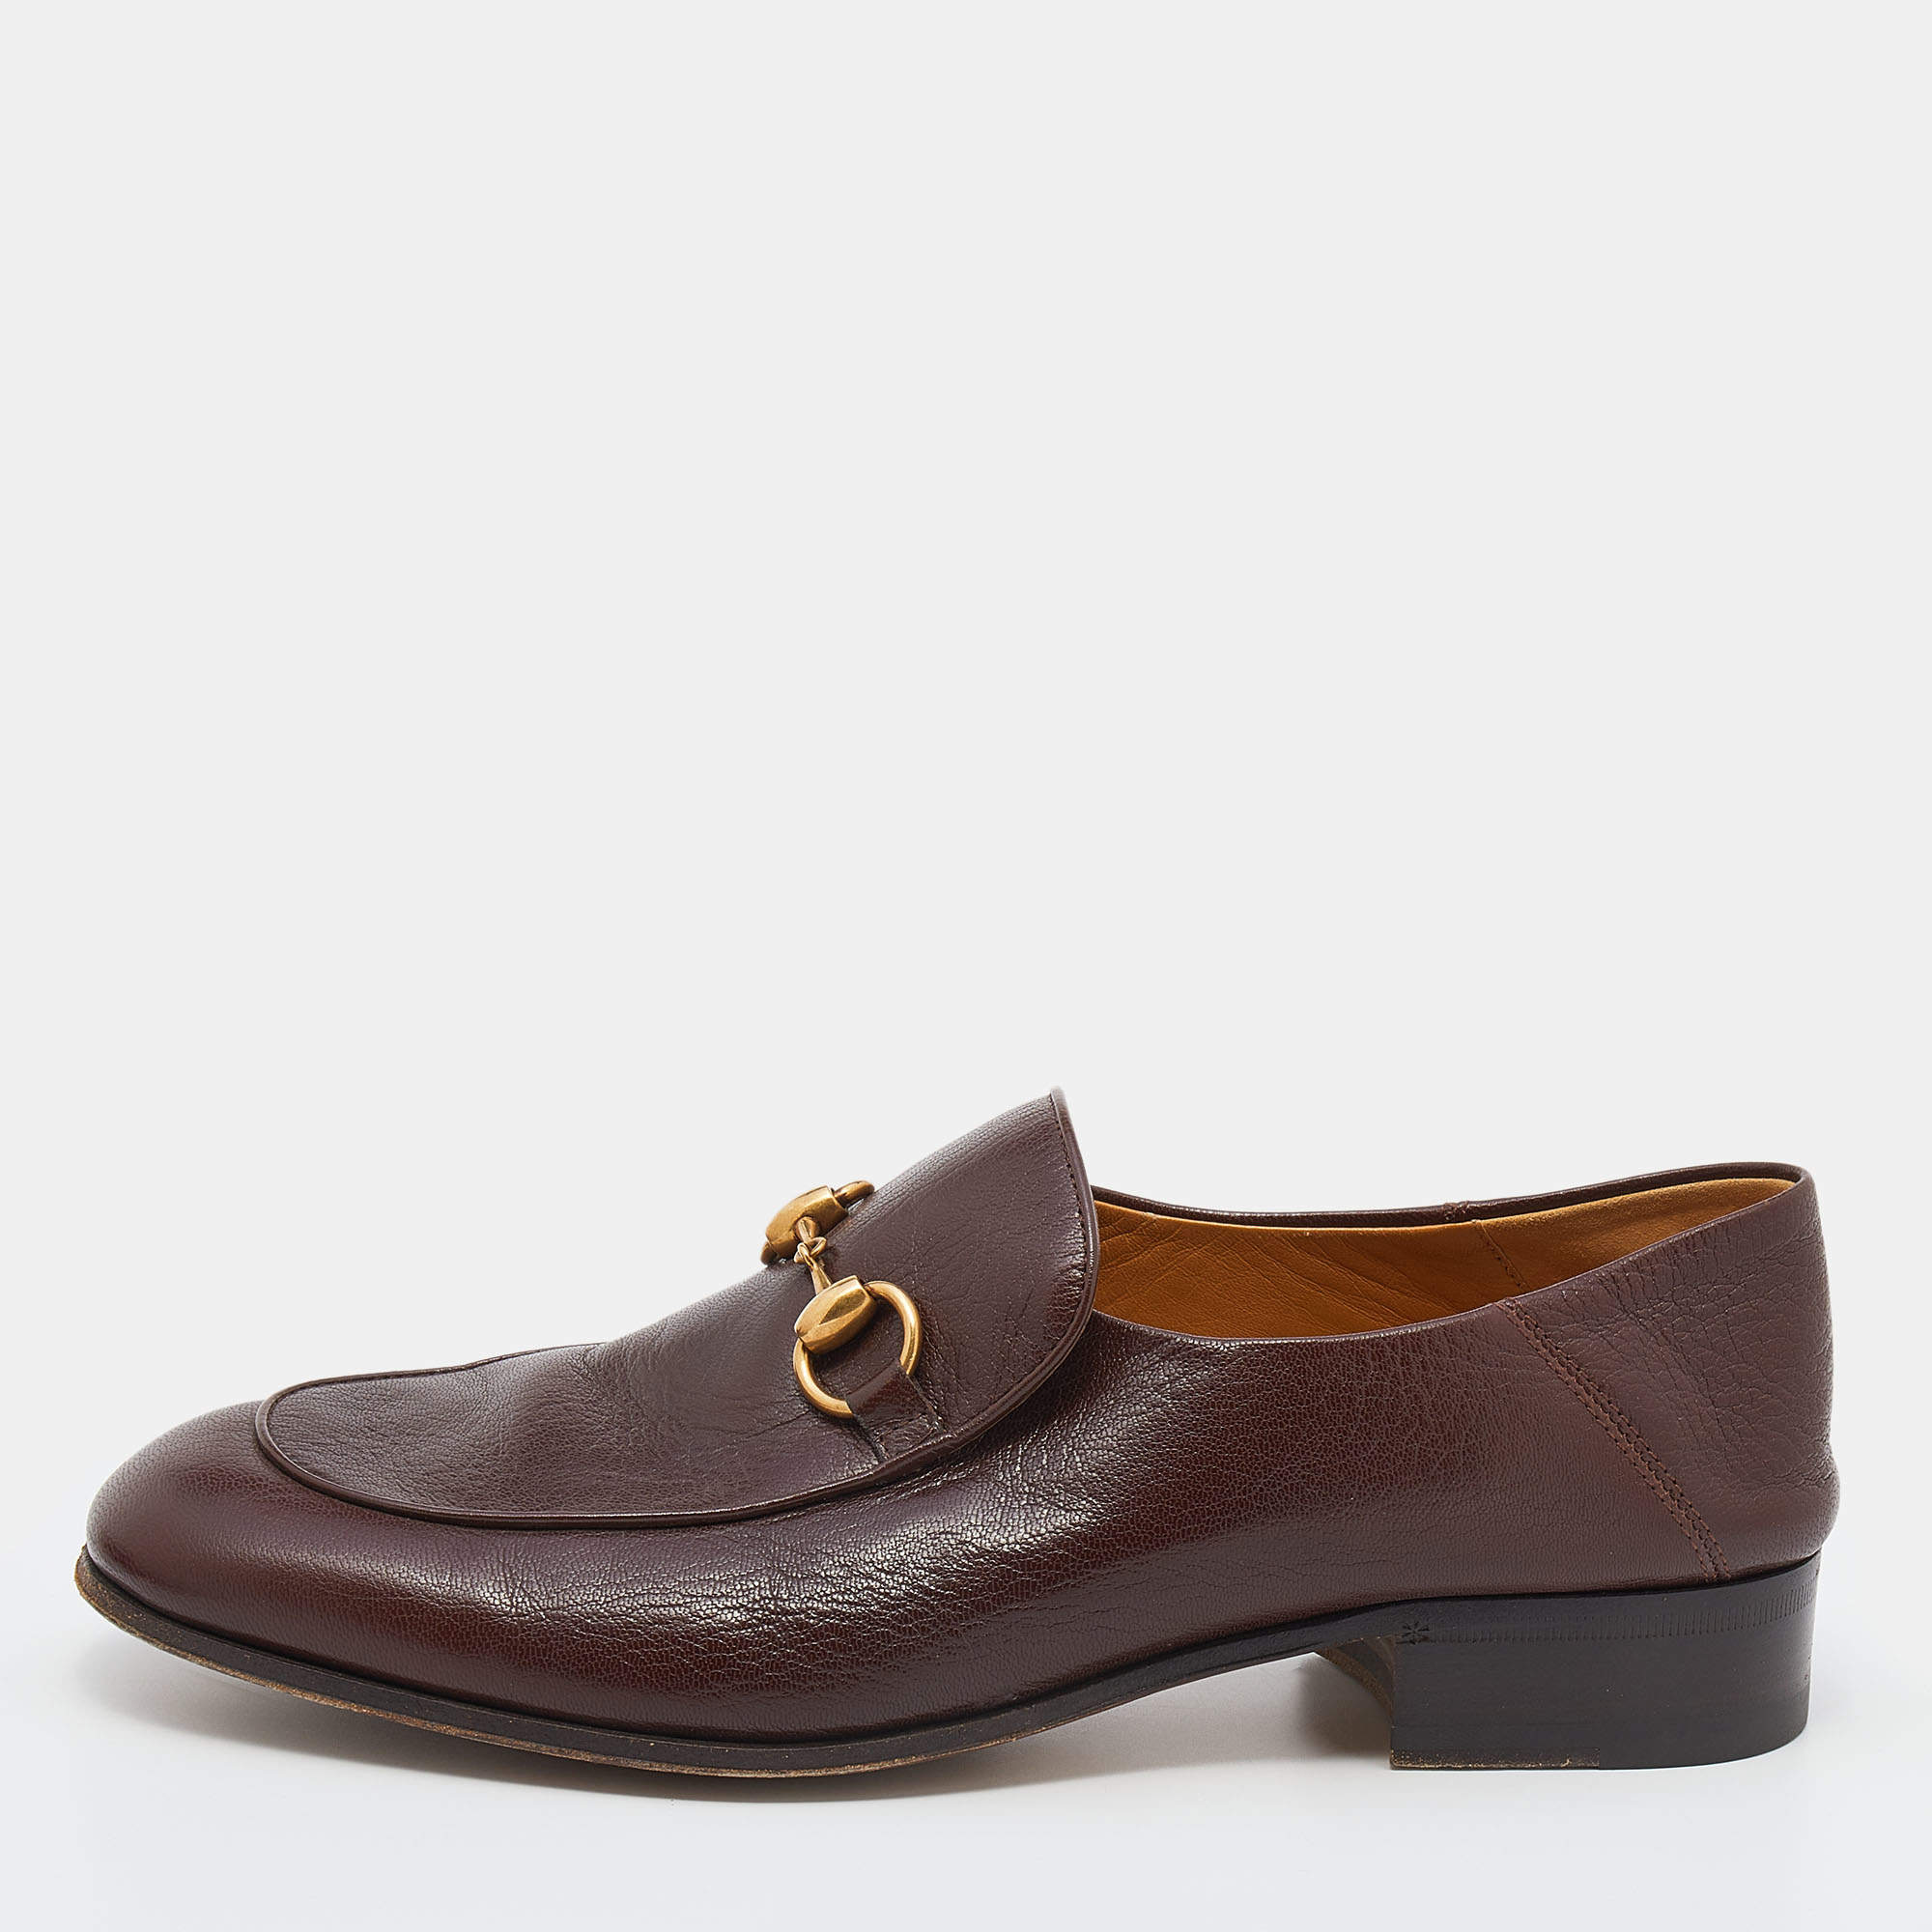 Gucci Brown Leather Jordaan Horsebit Slip On Loafers Size 41